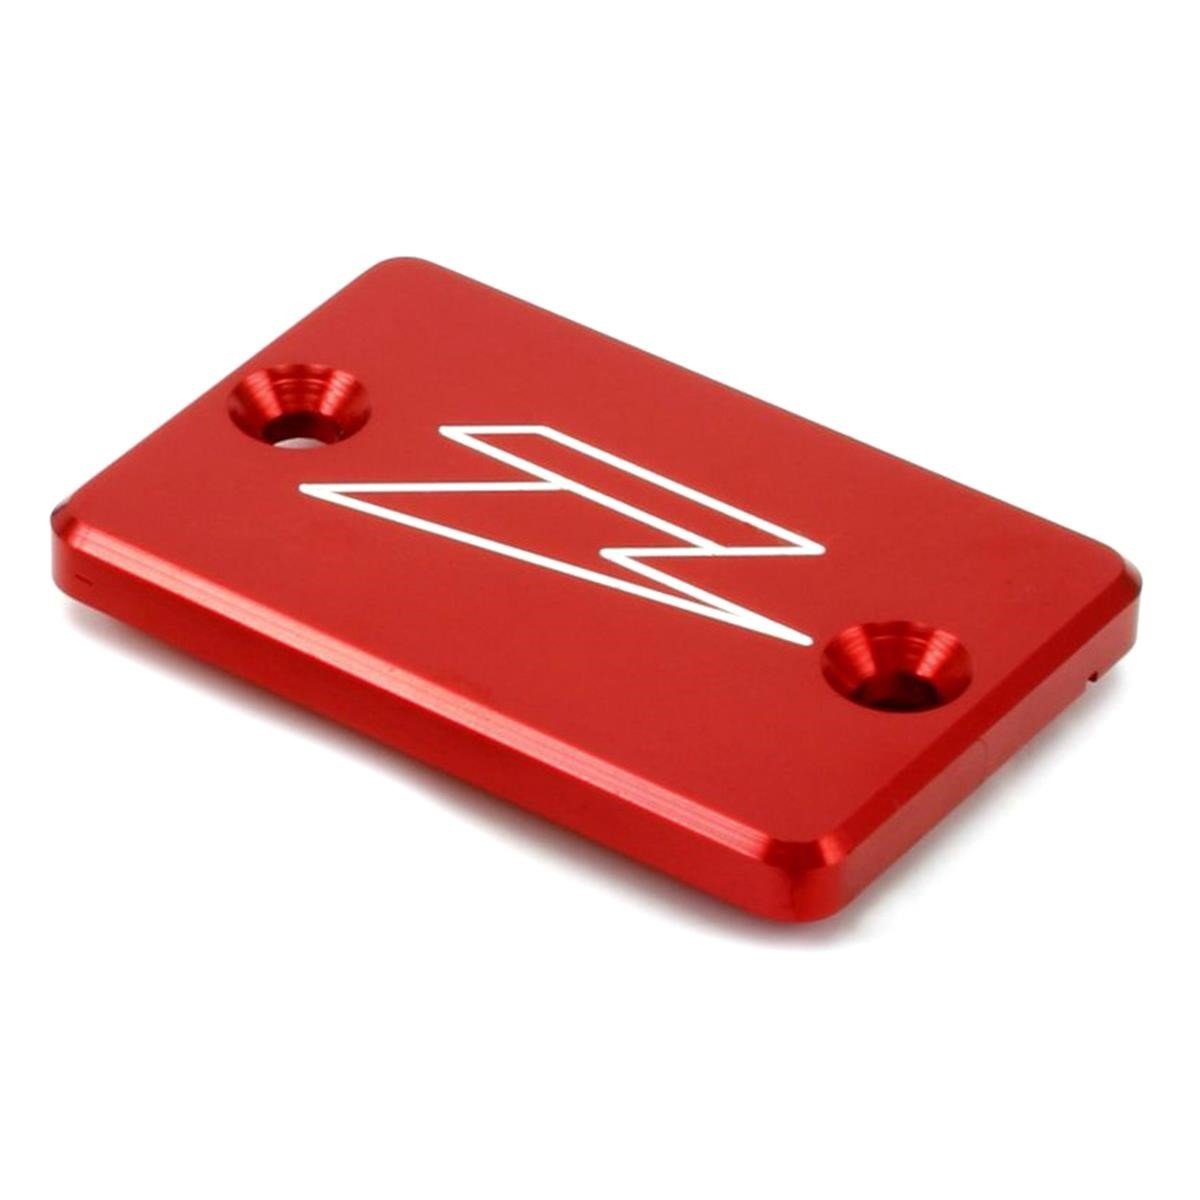 Zeta Cover  For Brake Reservoirs, front, Red, Yamaha YZ 125/250, YZF 250/426/450